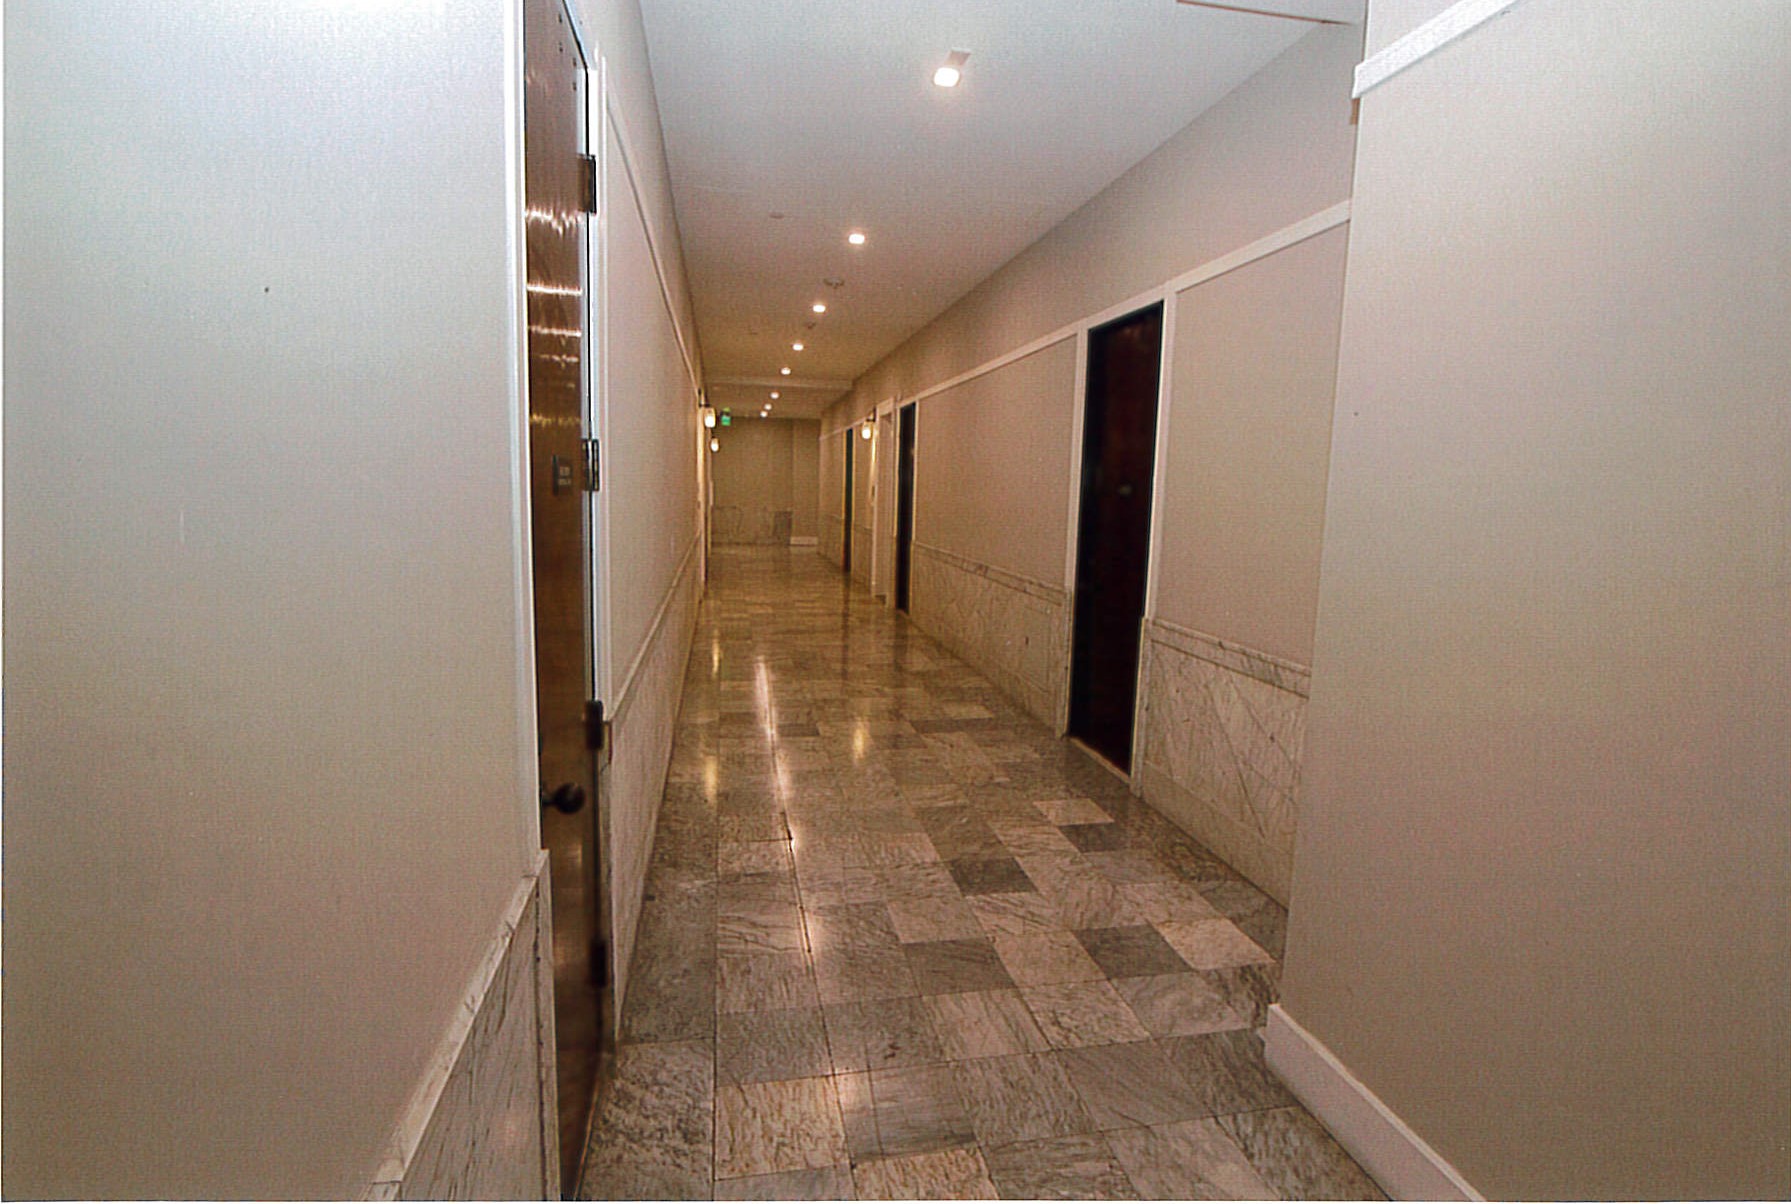 Rehabilitated 3rh floor corridor showing original marble wainscoting and flooring. Removed dropped ceiling. 